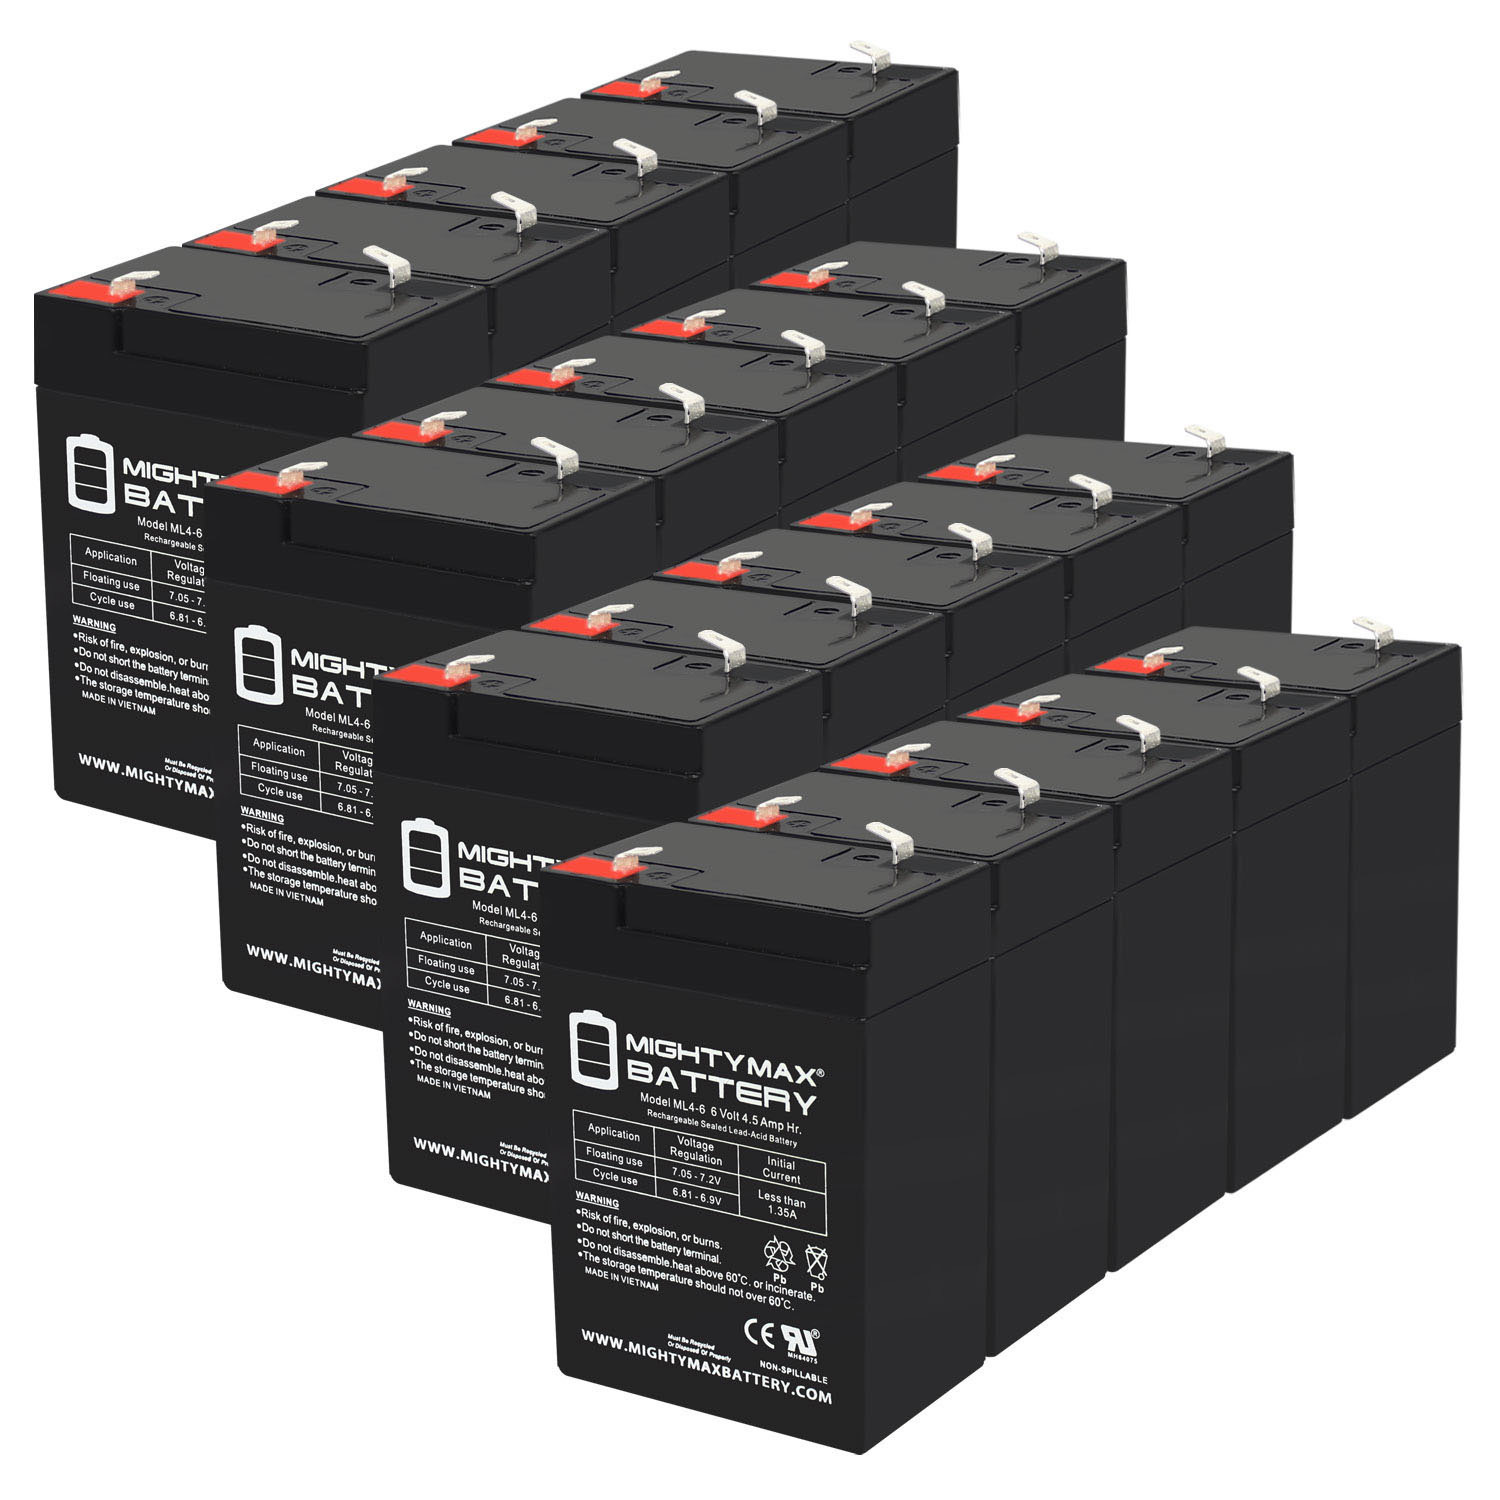 6V 4.5AH Replacement Battery for Tripplite BC275 - 20 Pack